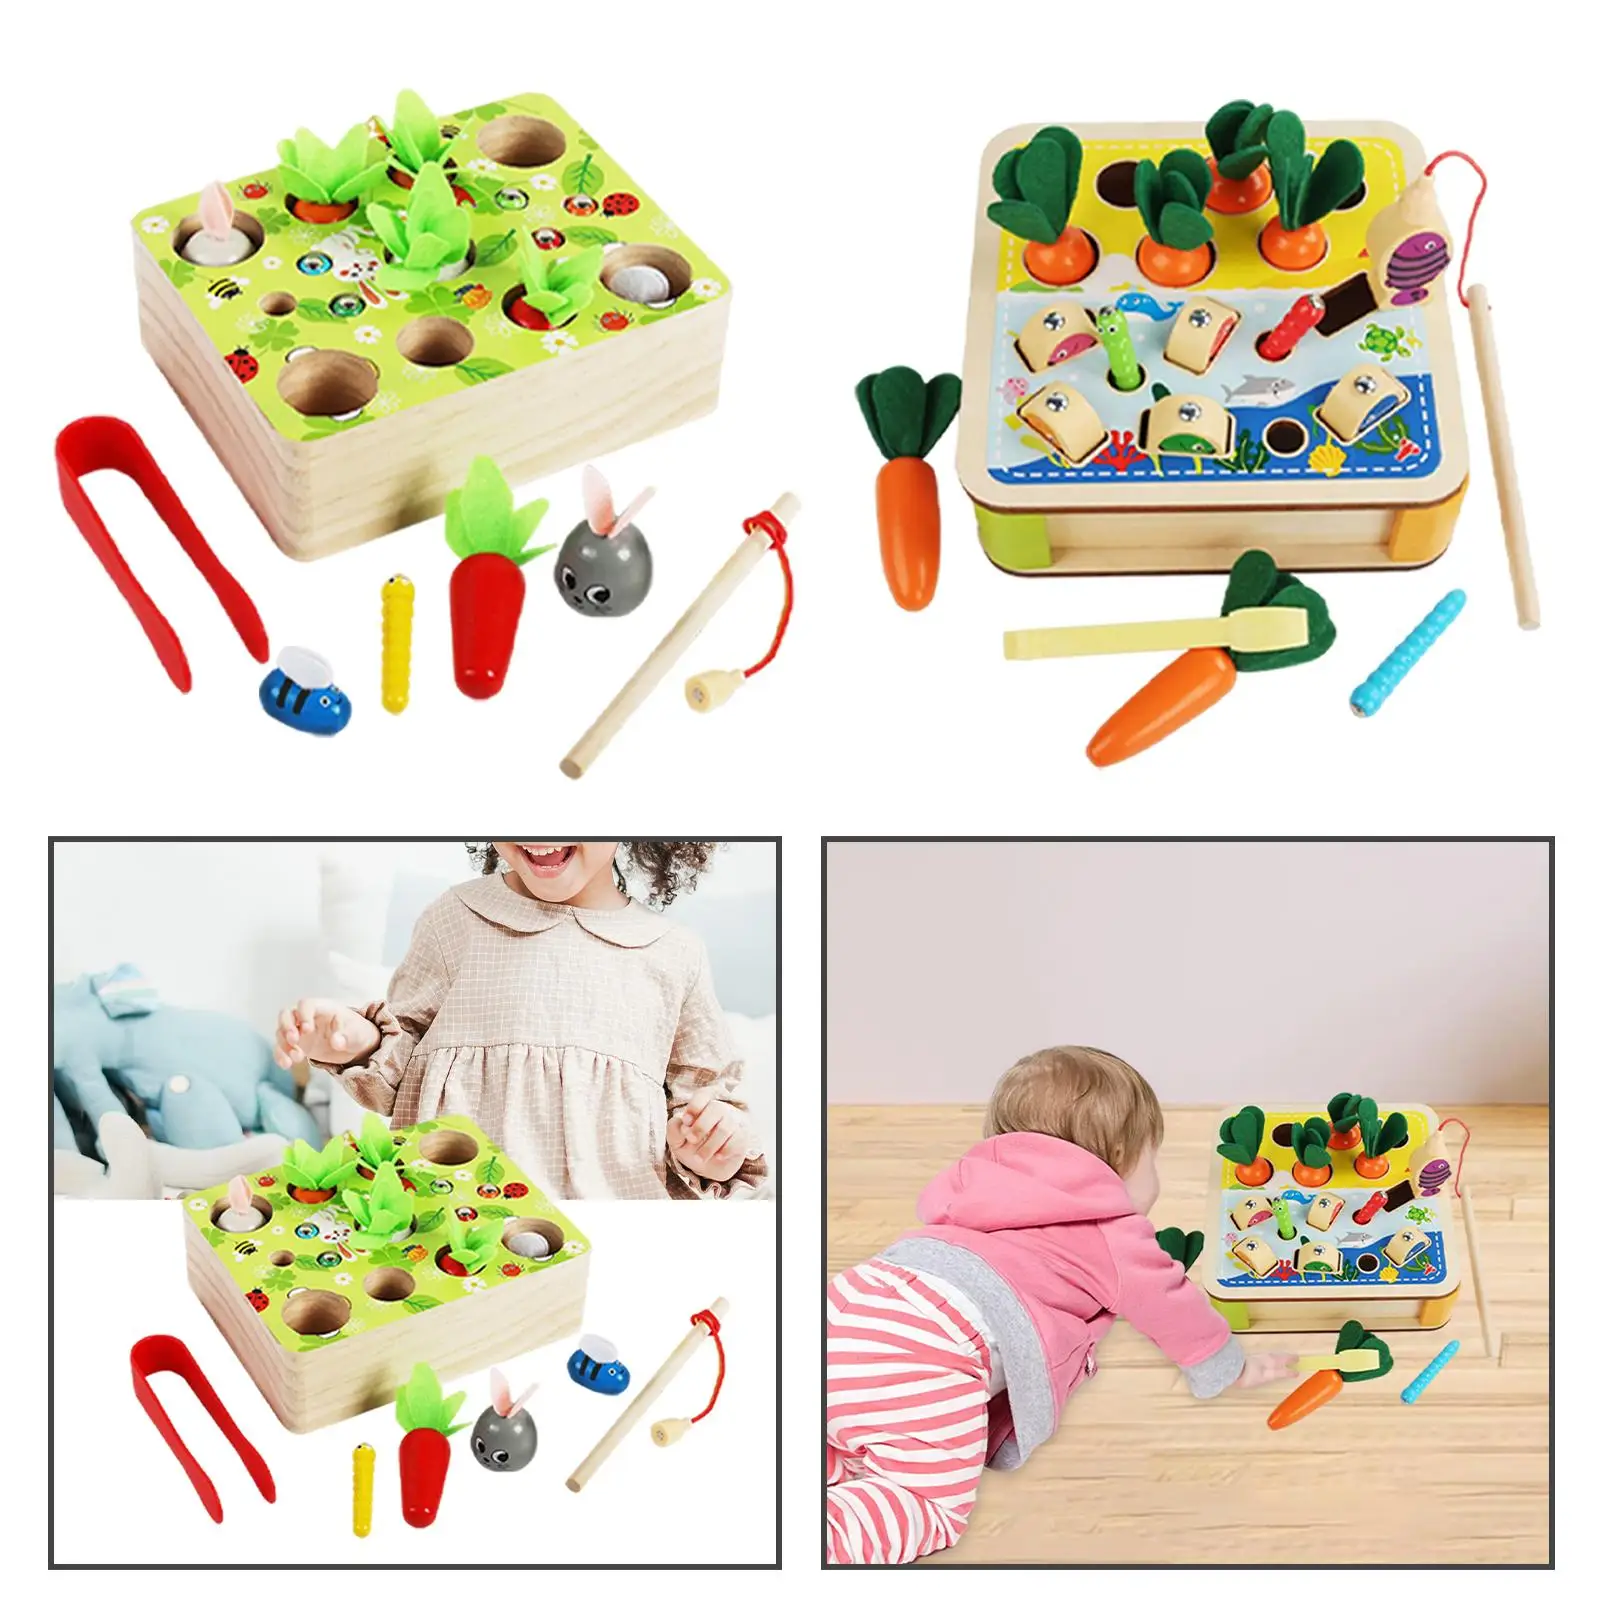 Montessori Pulling Carrot Toy Preschool Learning Toys Education Counting Hand Eye Coordination for Toddler Baby Birthday Gifts